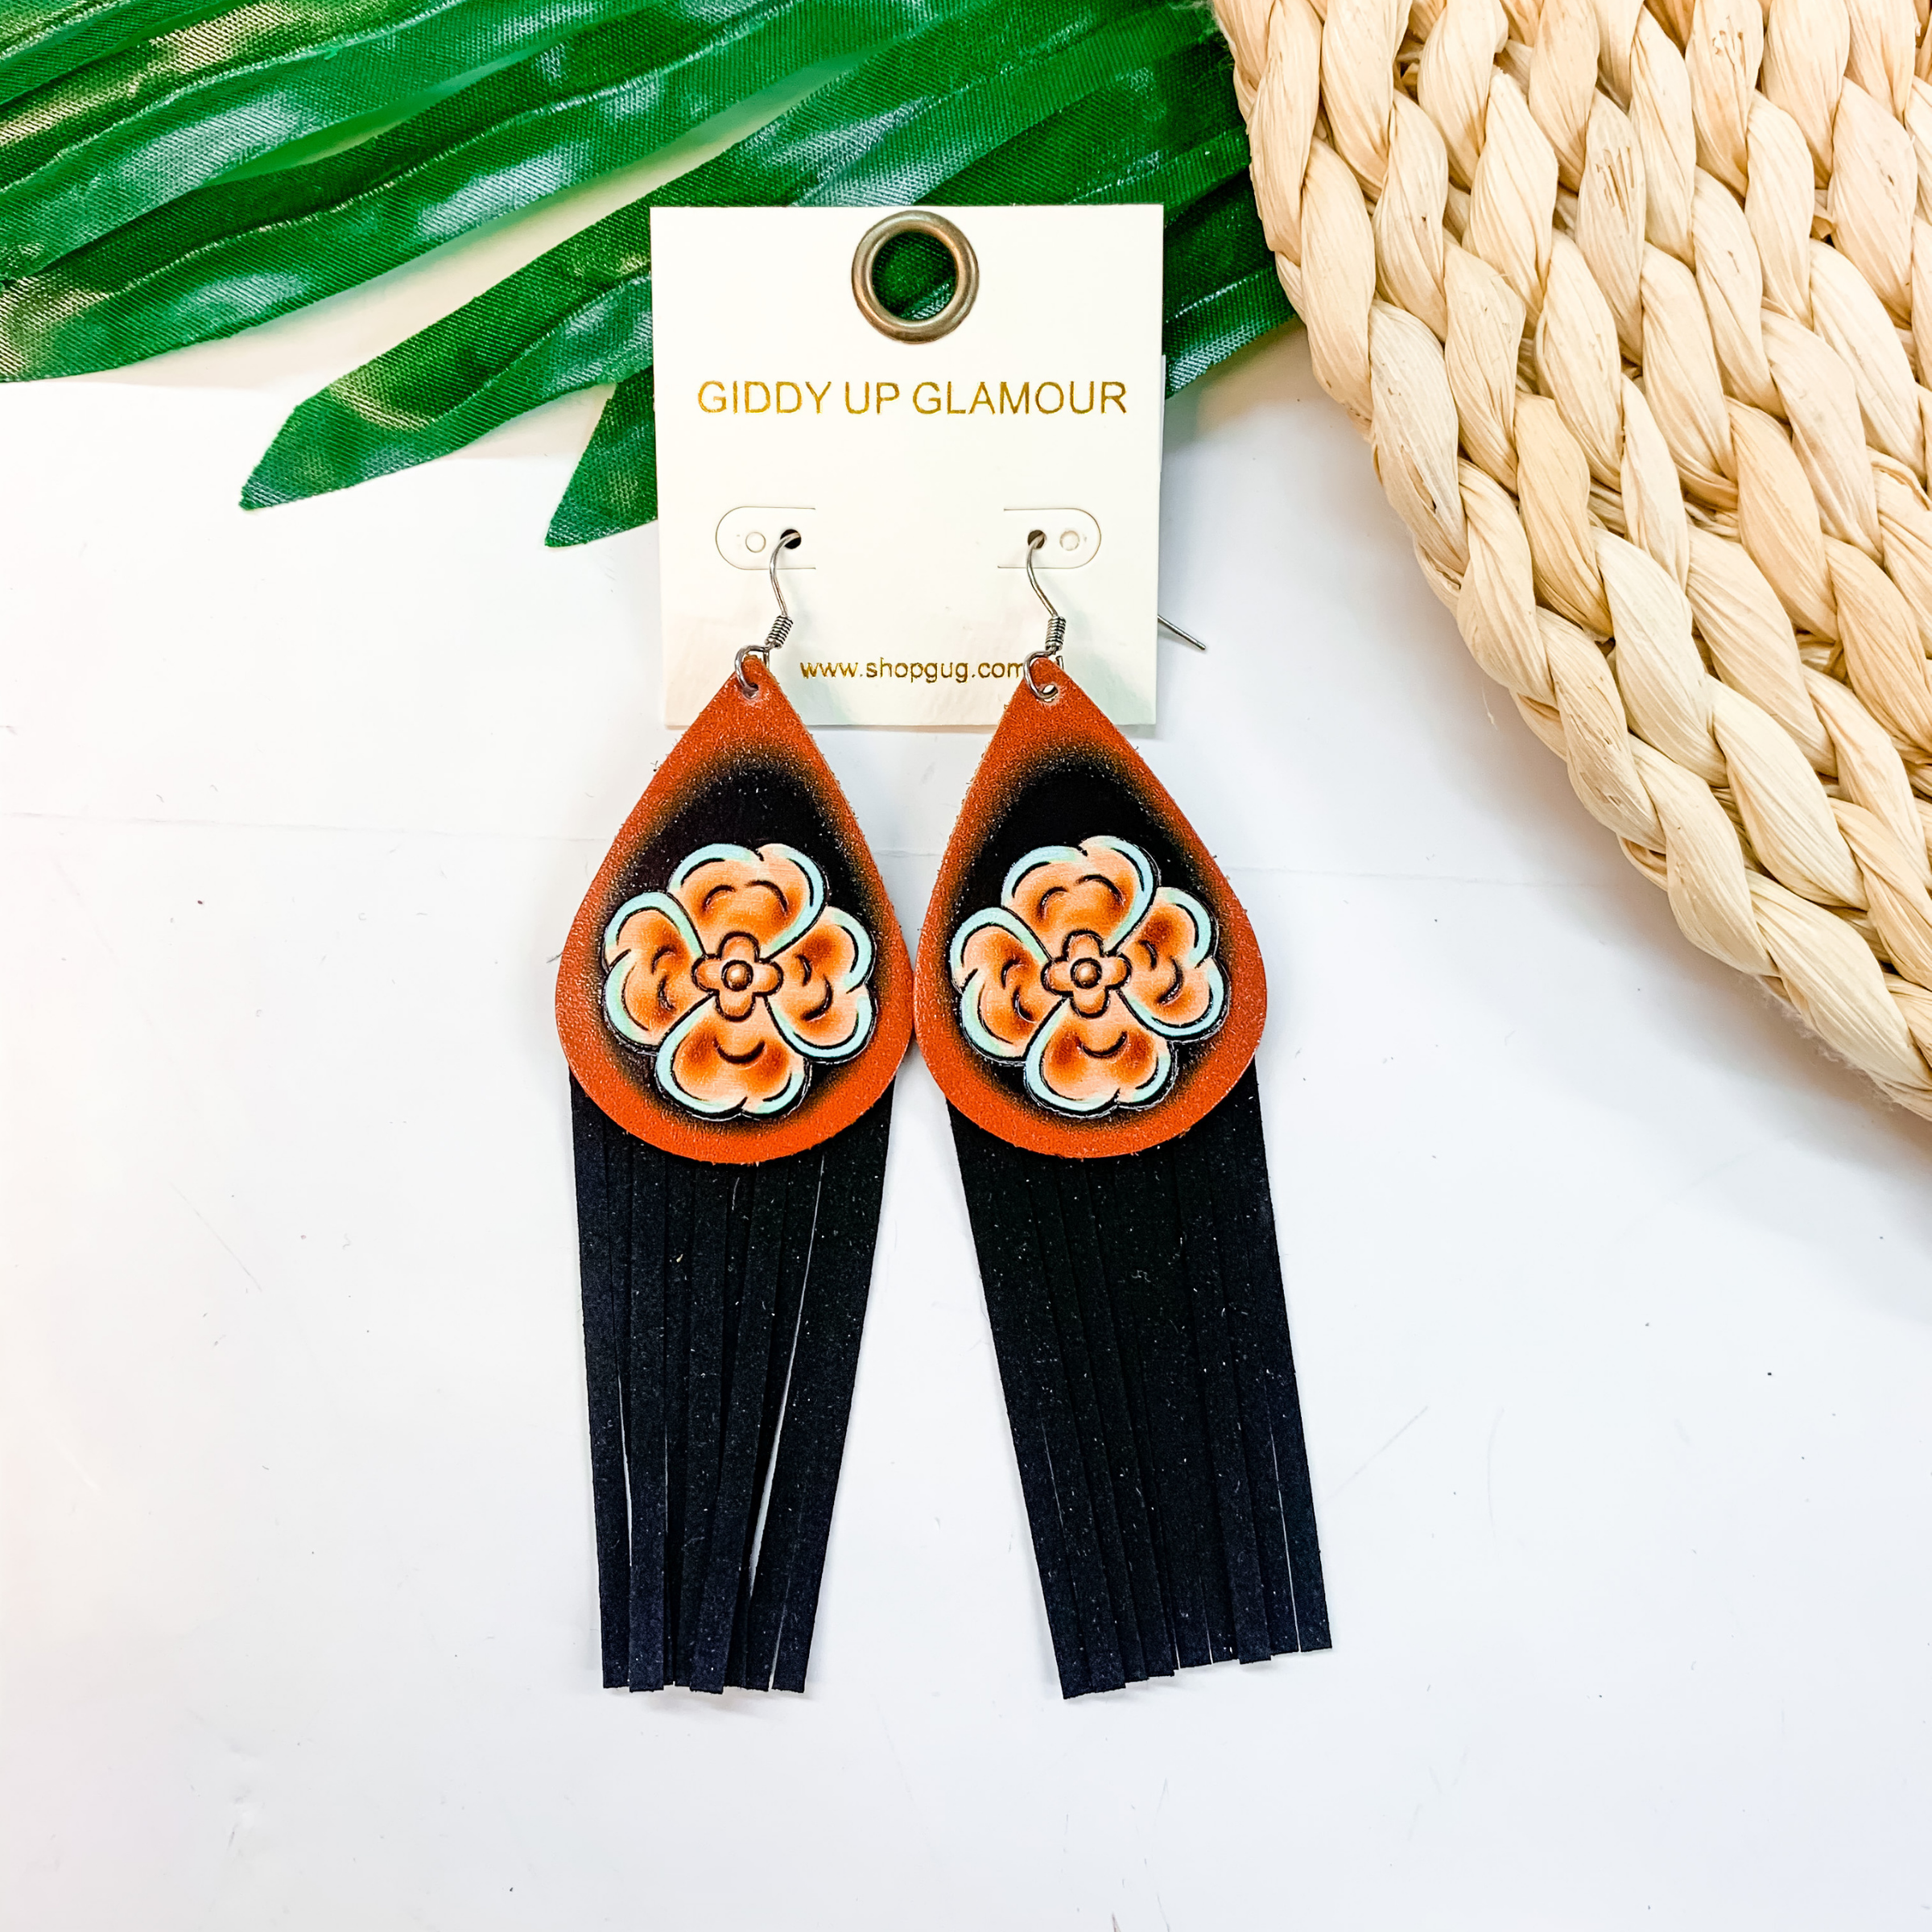 Leather Teardrop Earrings With Tassels in Black - Giddy Up Glamour Boutique